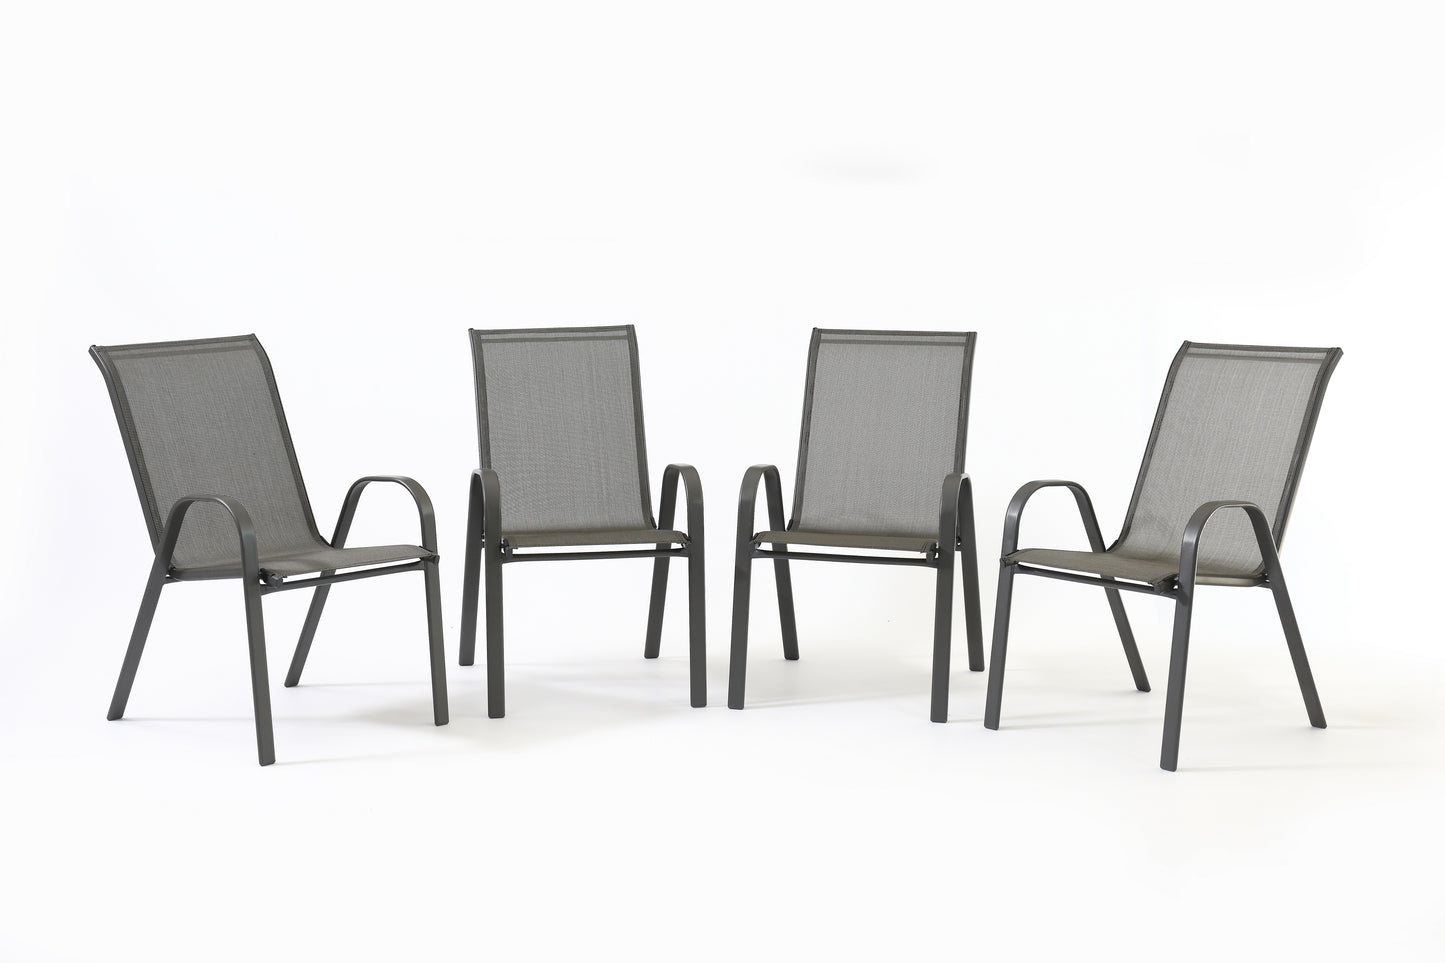 Stacking patio armchairs